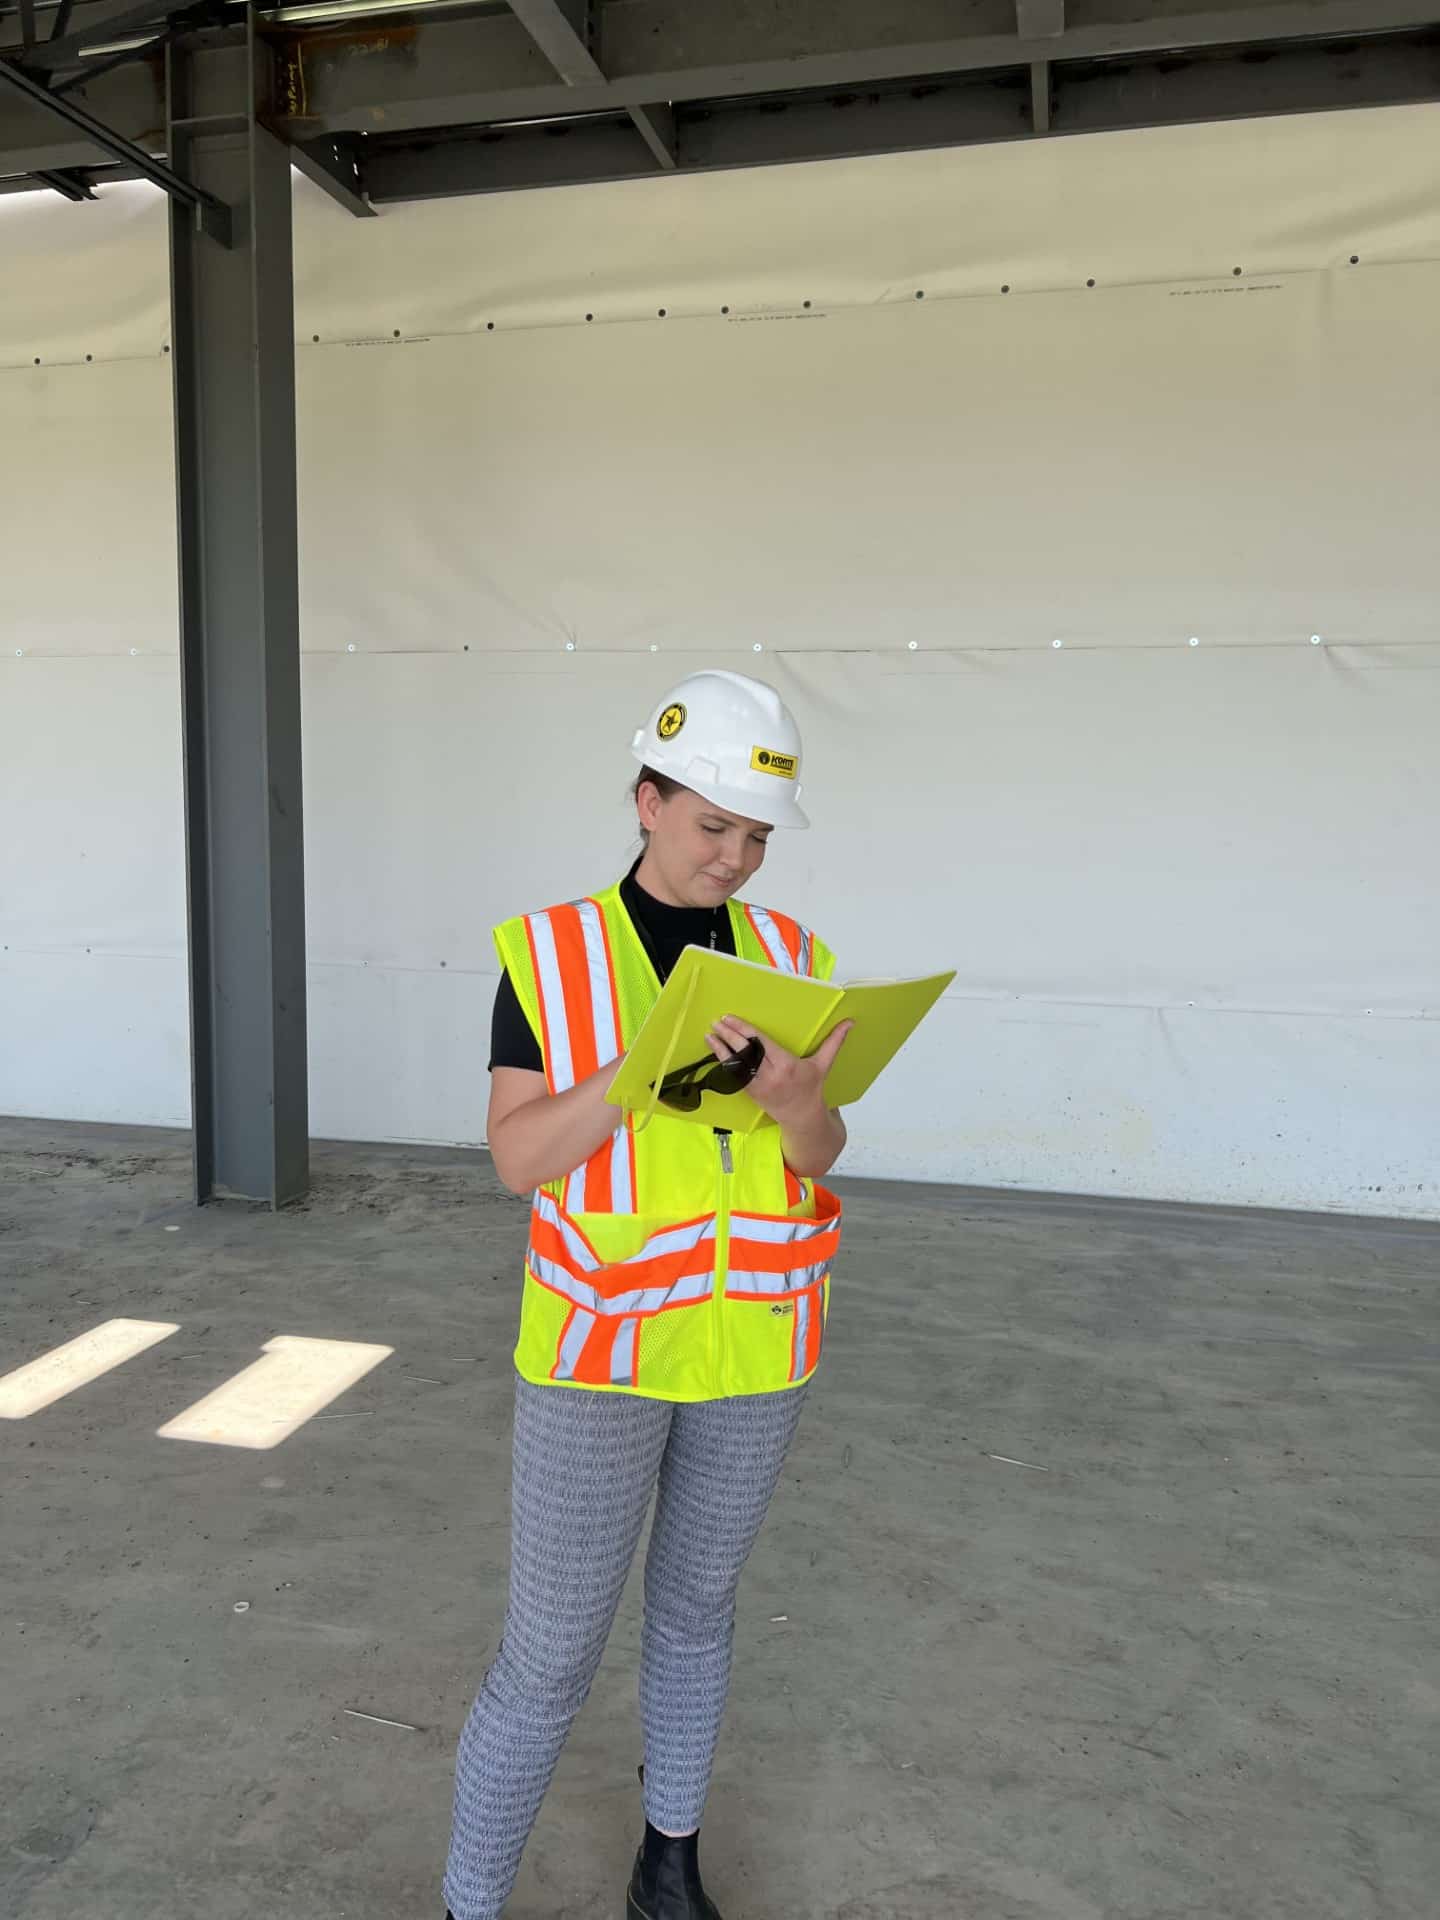 Macy Morley in a yellow safety vest and hard hat examining a file folder on a job site.